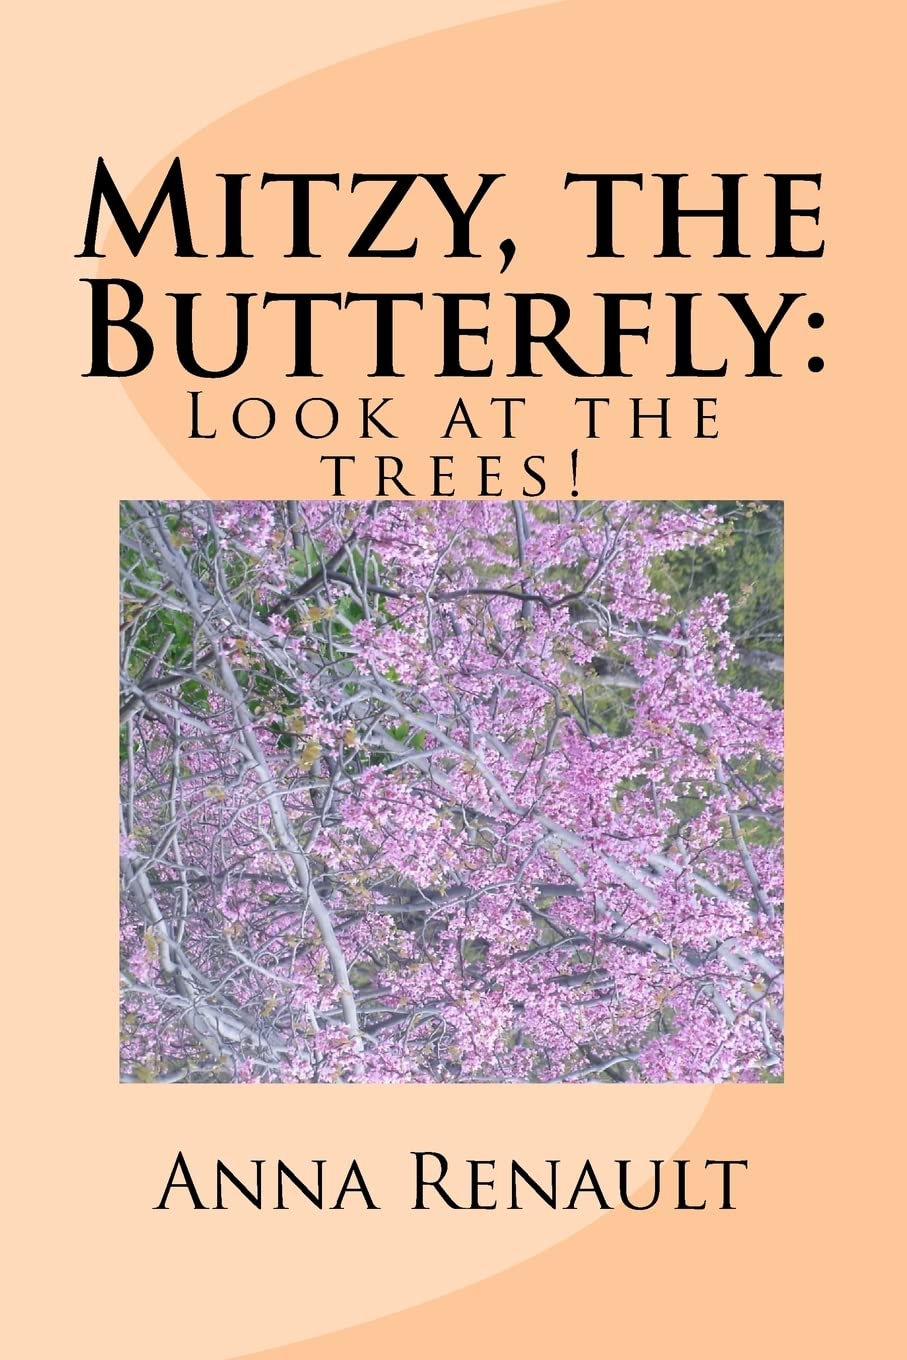 Mitzy, the Butterfly: Look at trees!